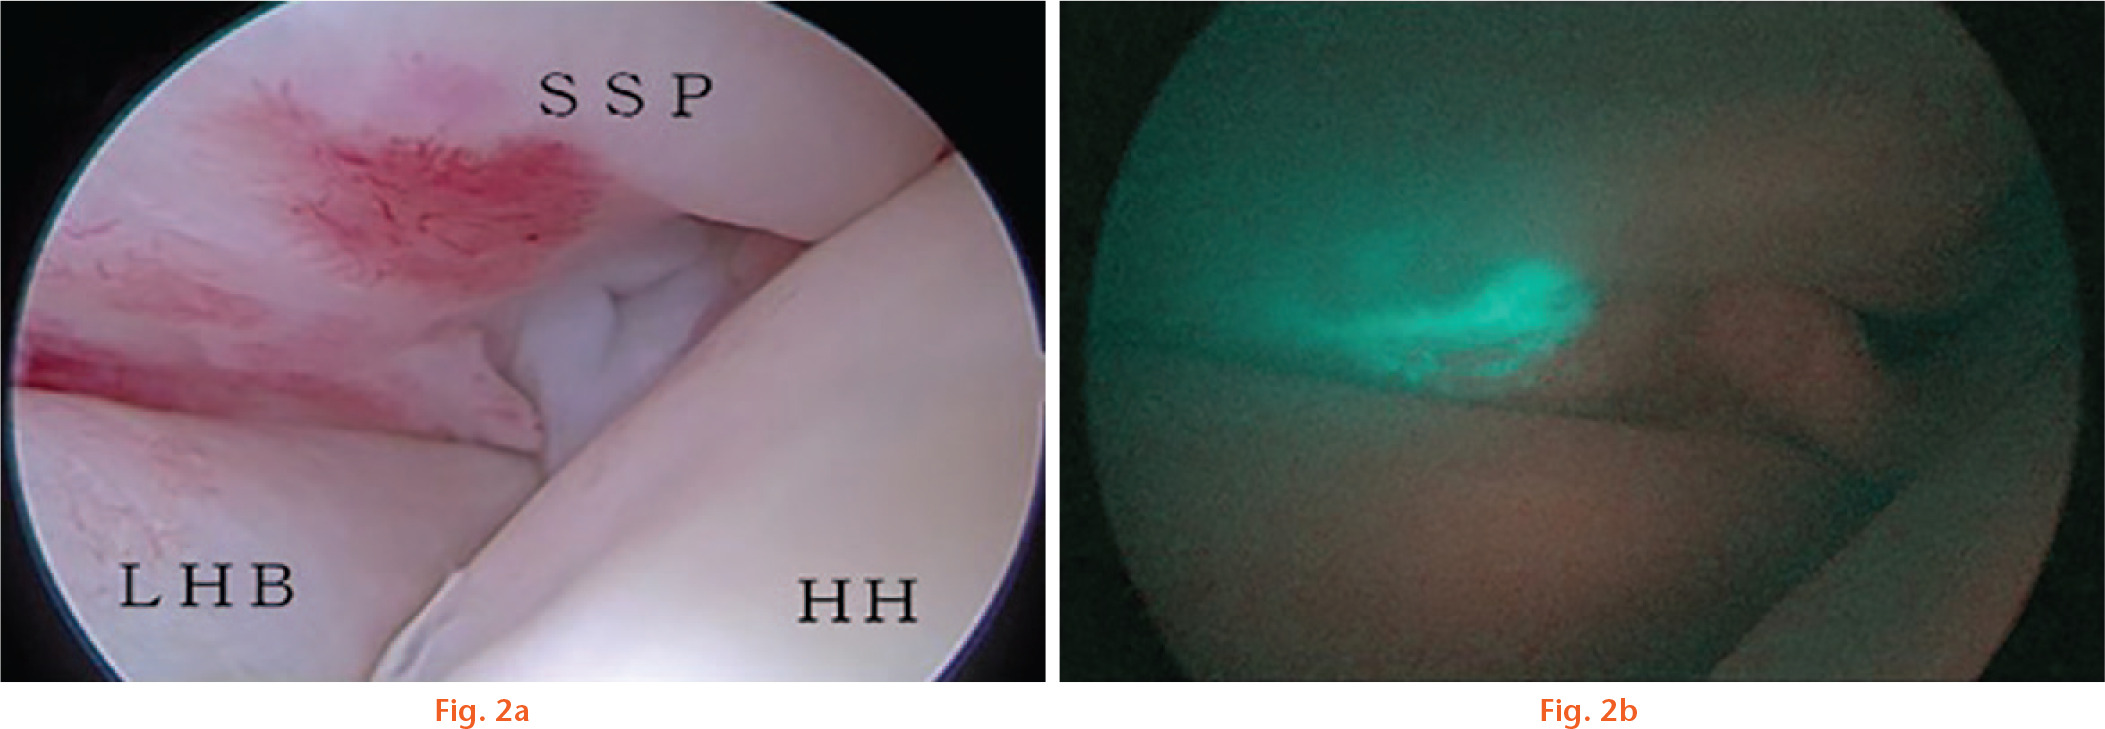 Fig. 2 
          a) Anterolateral area of a rotator cuff tear observed before indocyanine green (ICG) fluorescence angiography; b) Anterolateral area of a rotator cuff tear observed at the time of ICG fluorescence angiography. SSP, supraspinatus tendon; LHB, long head of biceps brachii; HH, head of humerus
        